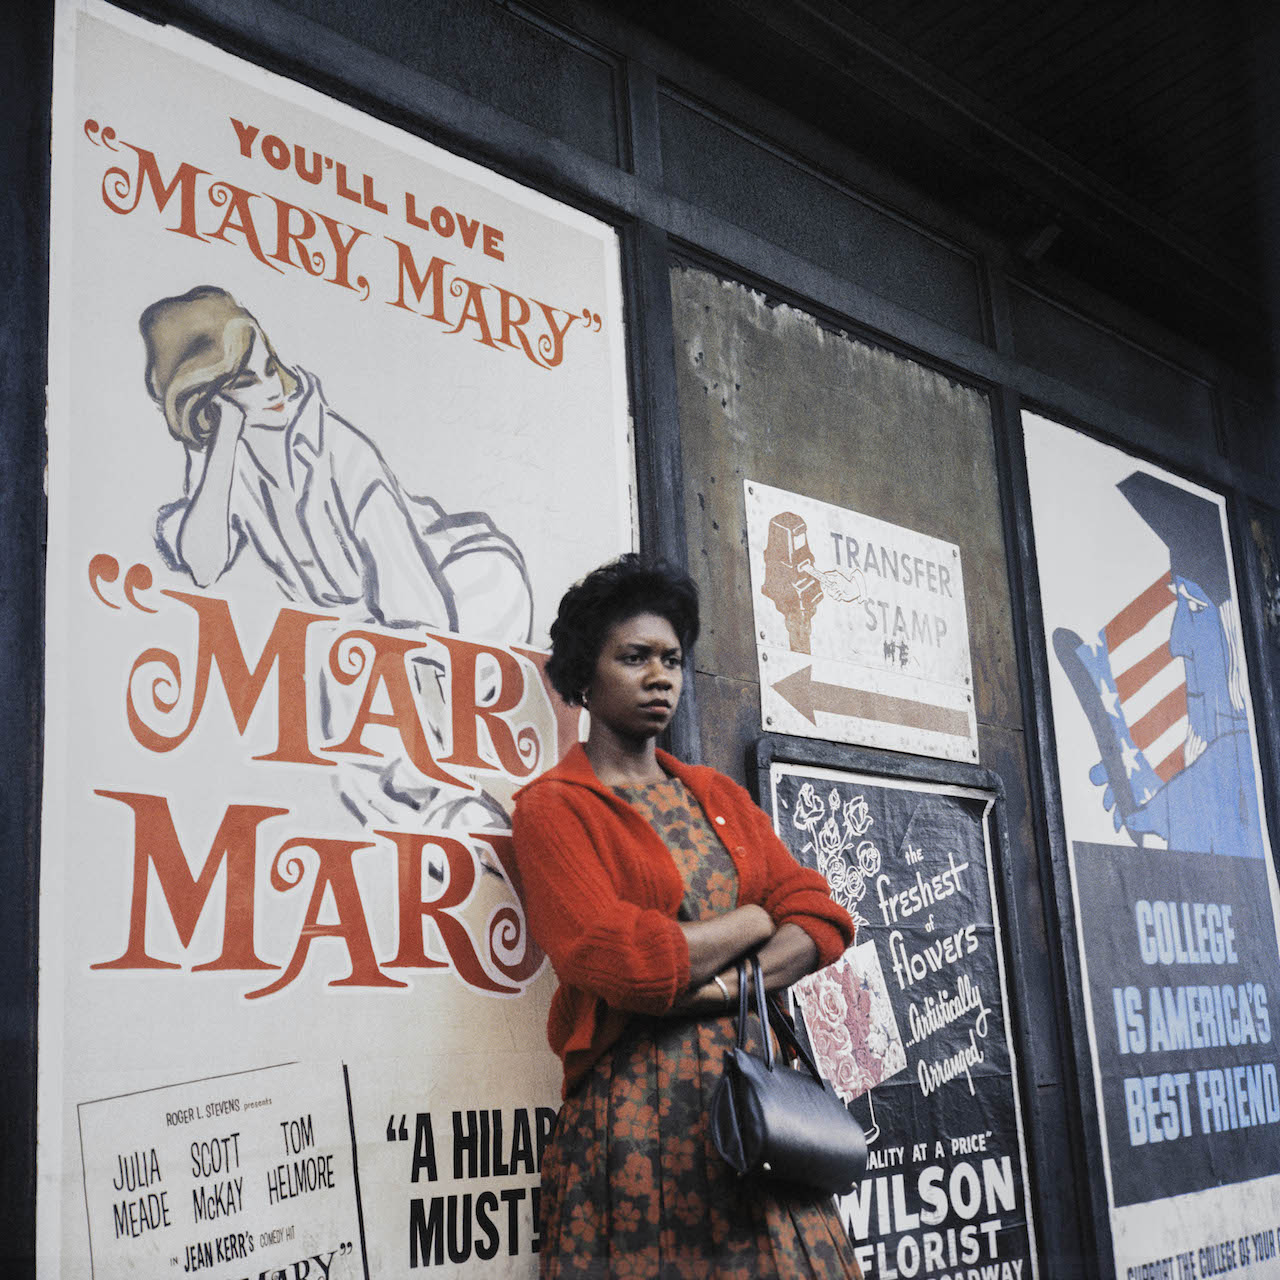 Vivian-Maier-Chicago-1962-1962-©Estate-of-Vivian-Maier-Courtesy-of-Maloof-Collection-and-Howard-Greenberg-Gallery-NY